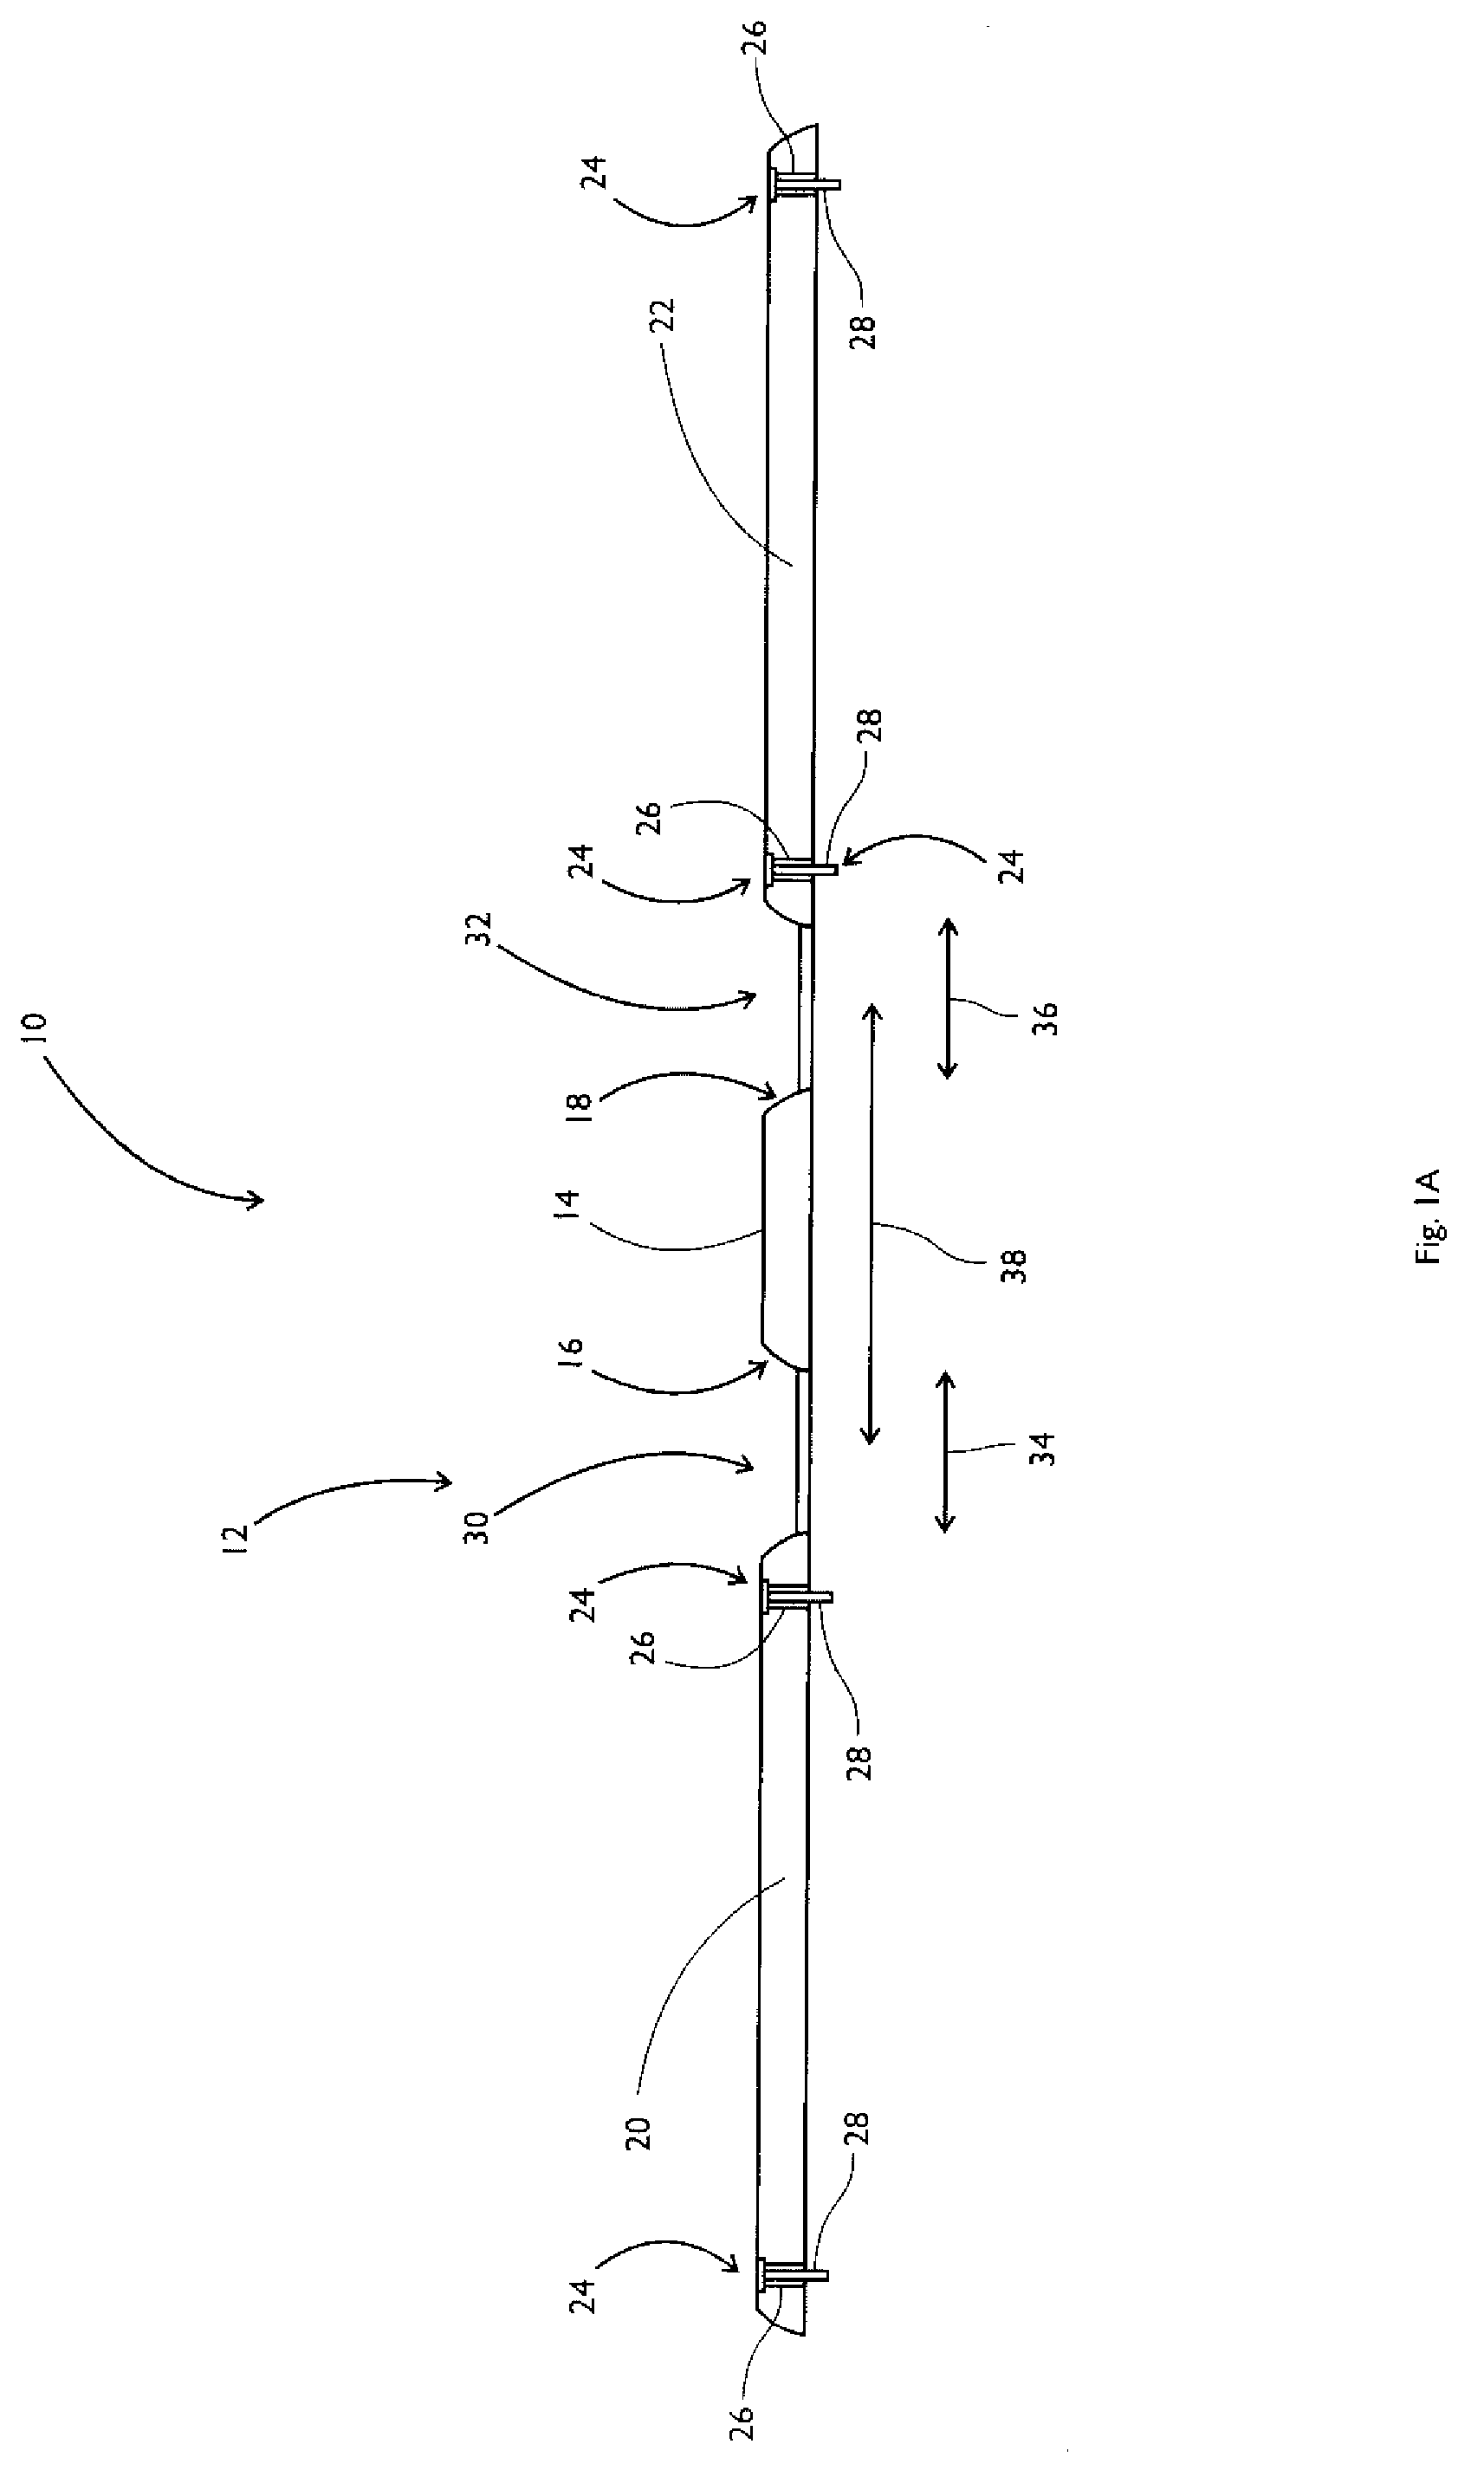 Method and System for Vehicular Traffic Management